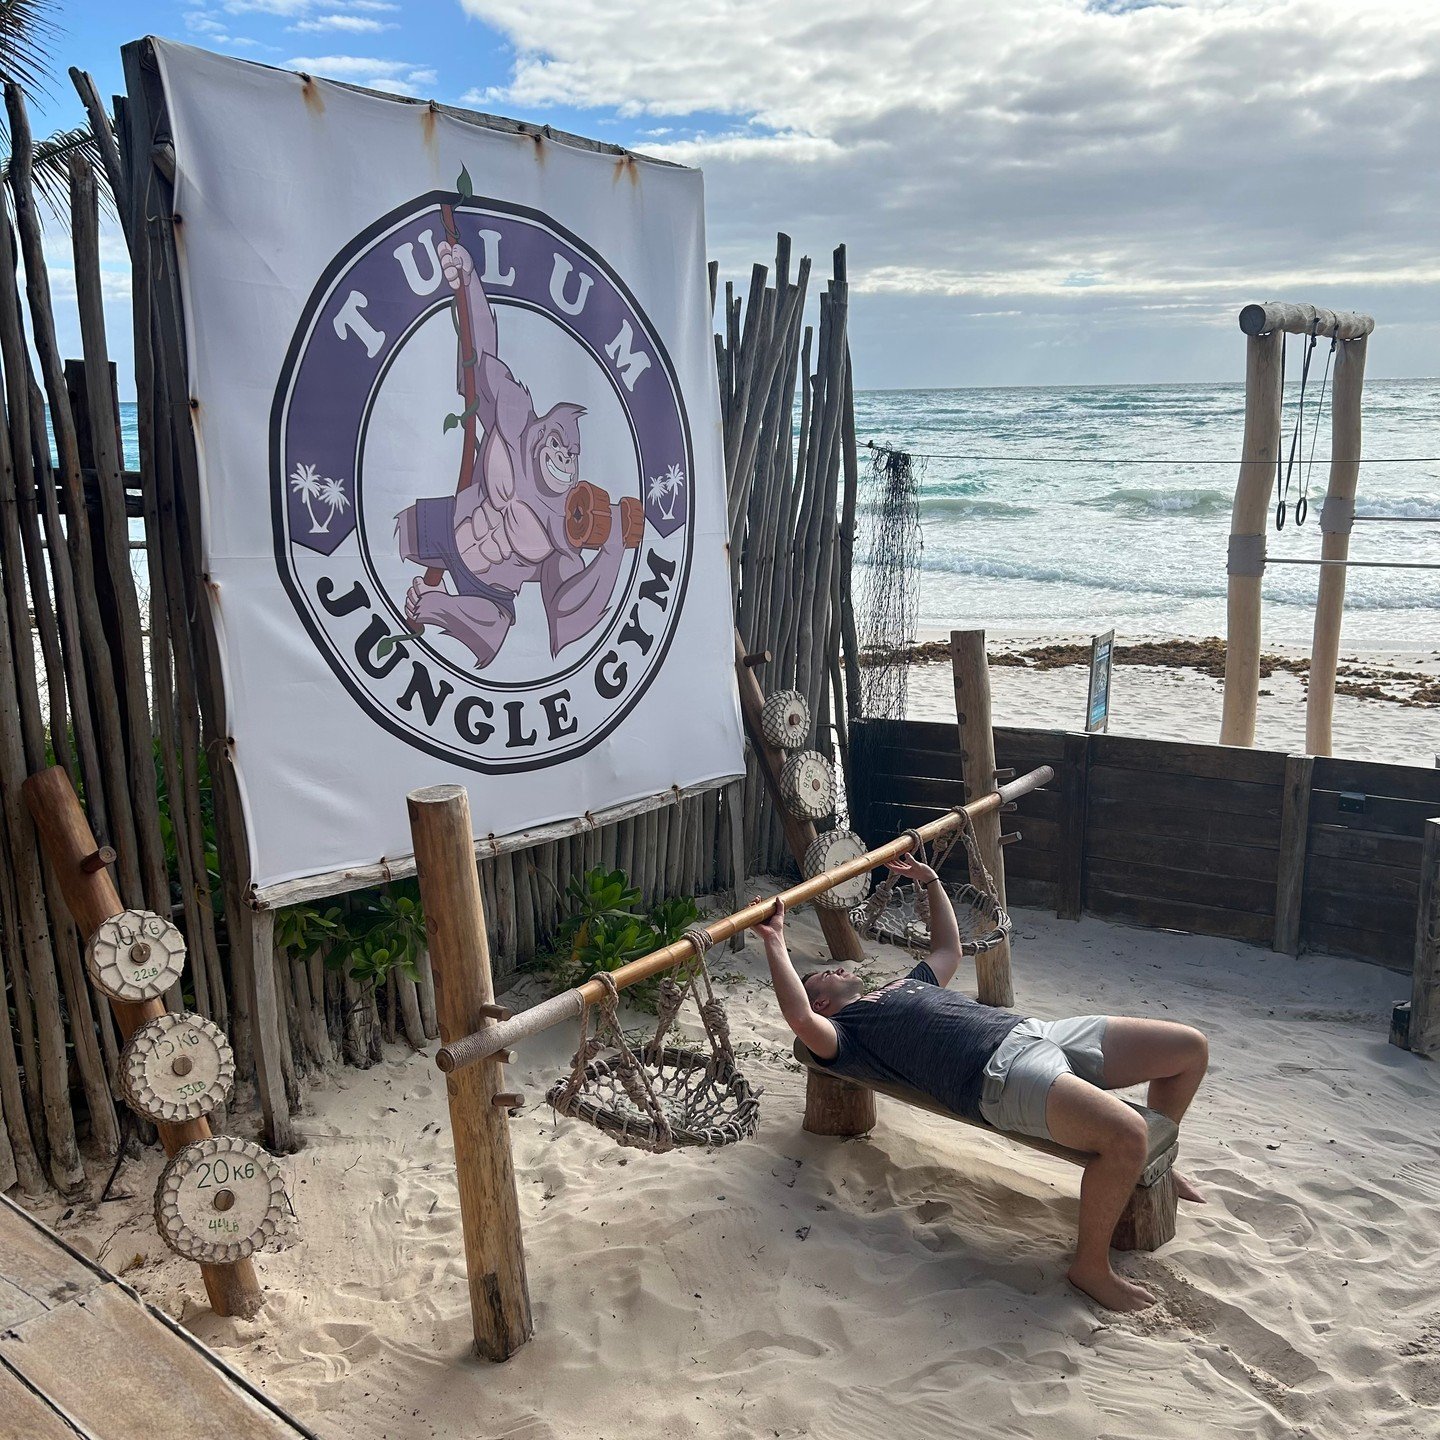 BIG ANNOUNCEMENT!😀🌴
Next Tulum Retreat will be Sept 19th-23rd. Make sure to mark it on your calendar because we do not want you missing out on this Men's Health+Adventure retreat. 😎🌞

More info to come- but just a reminder about how incredible th